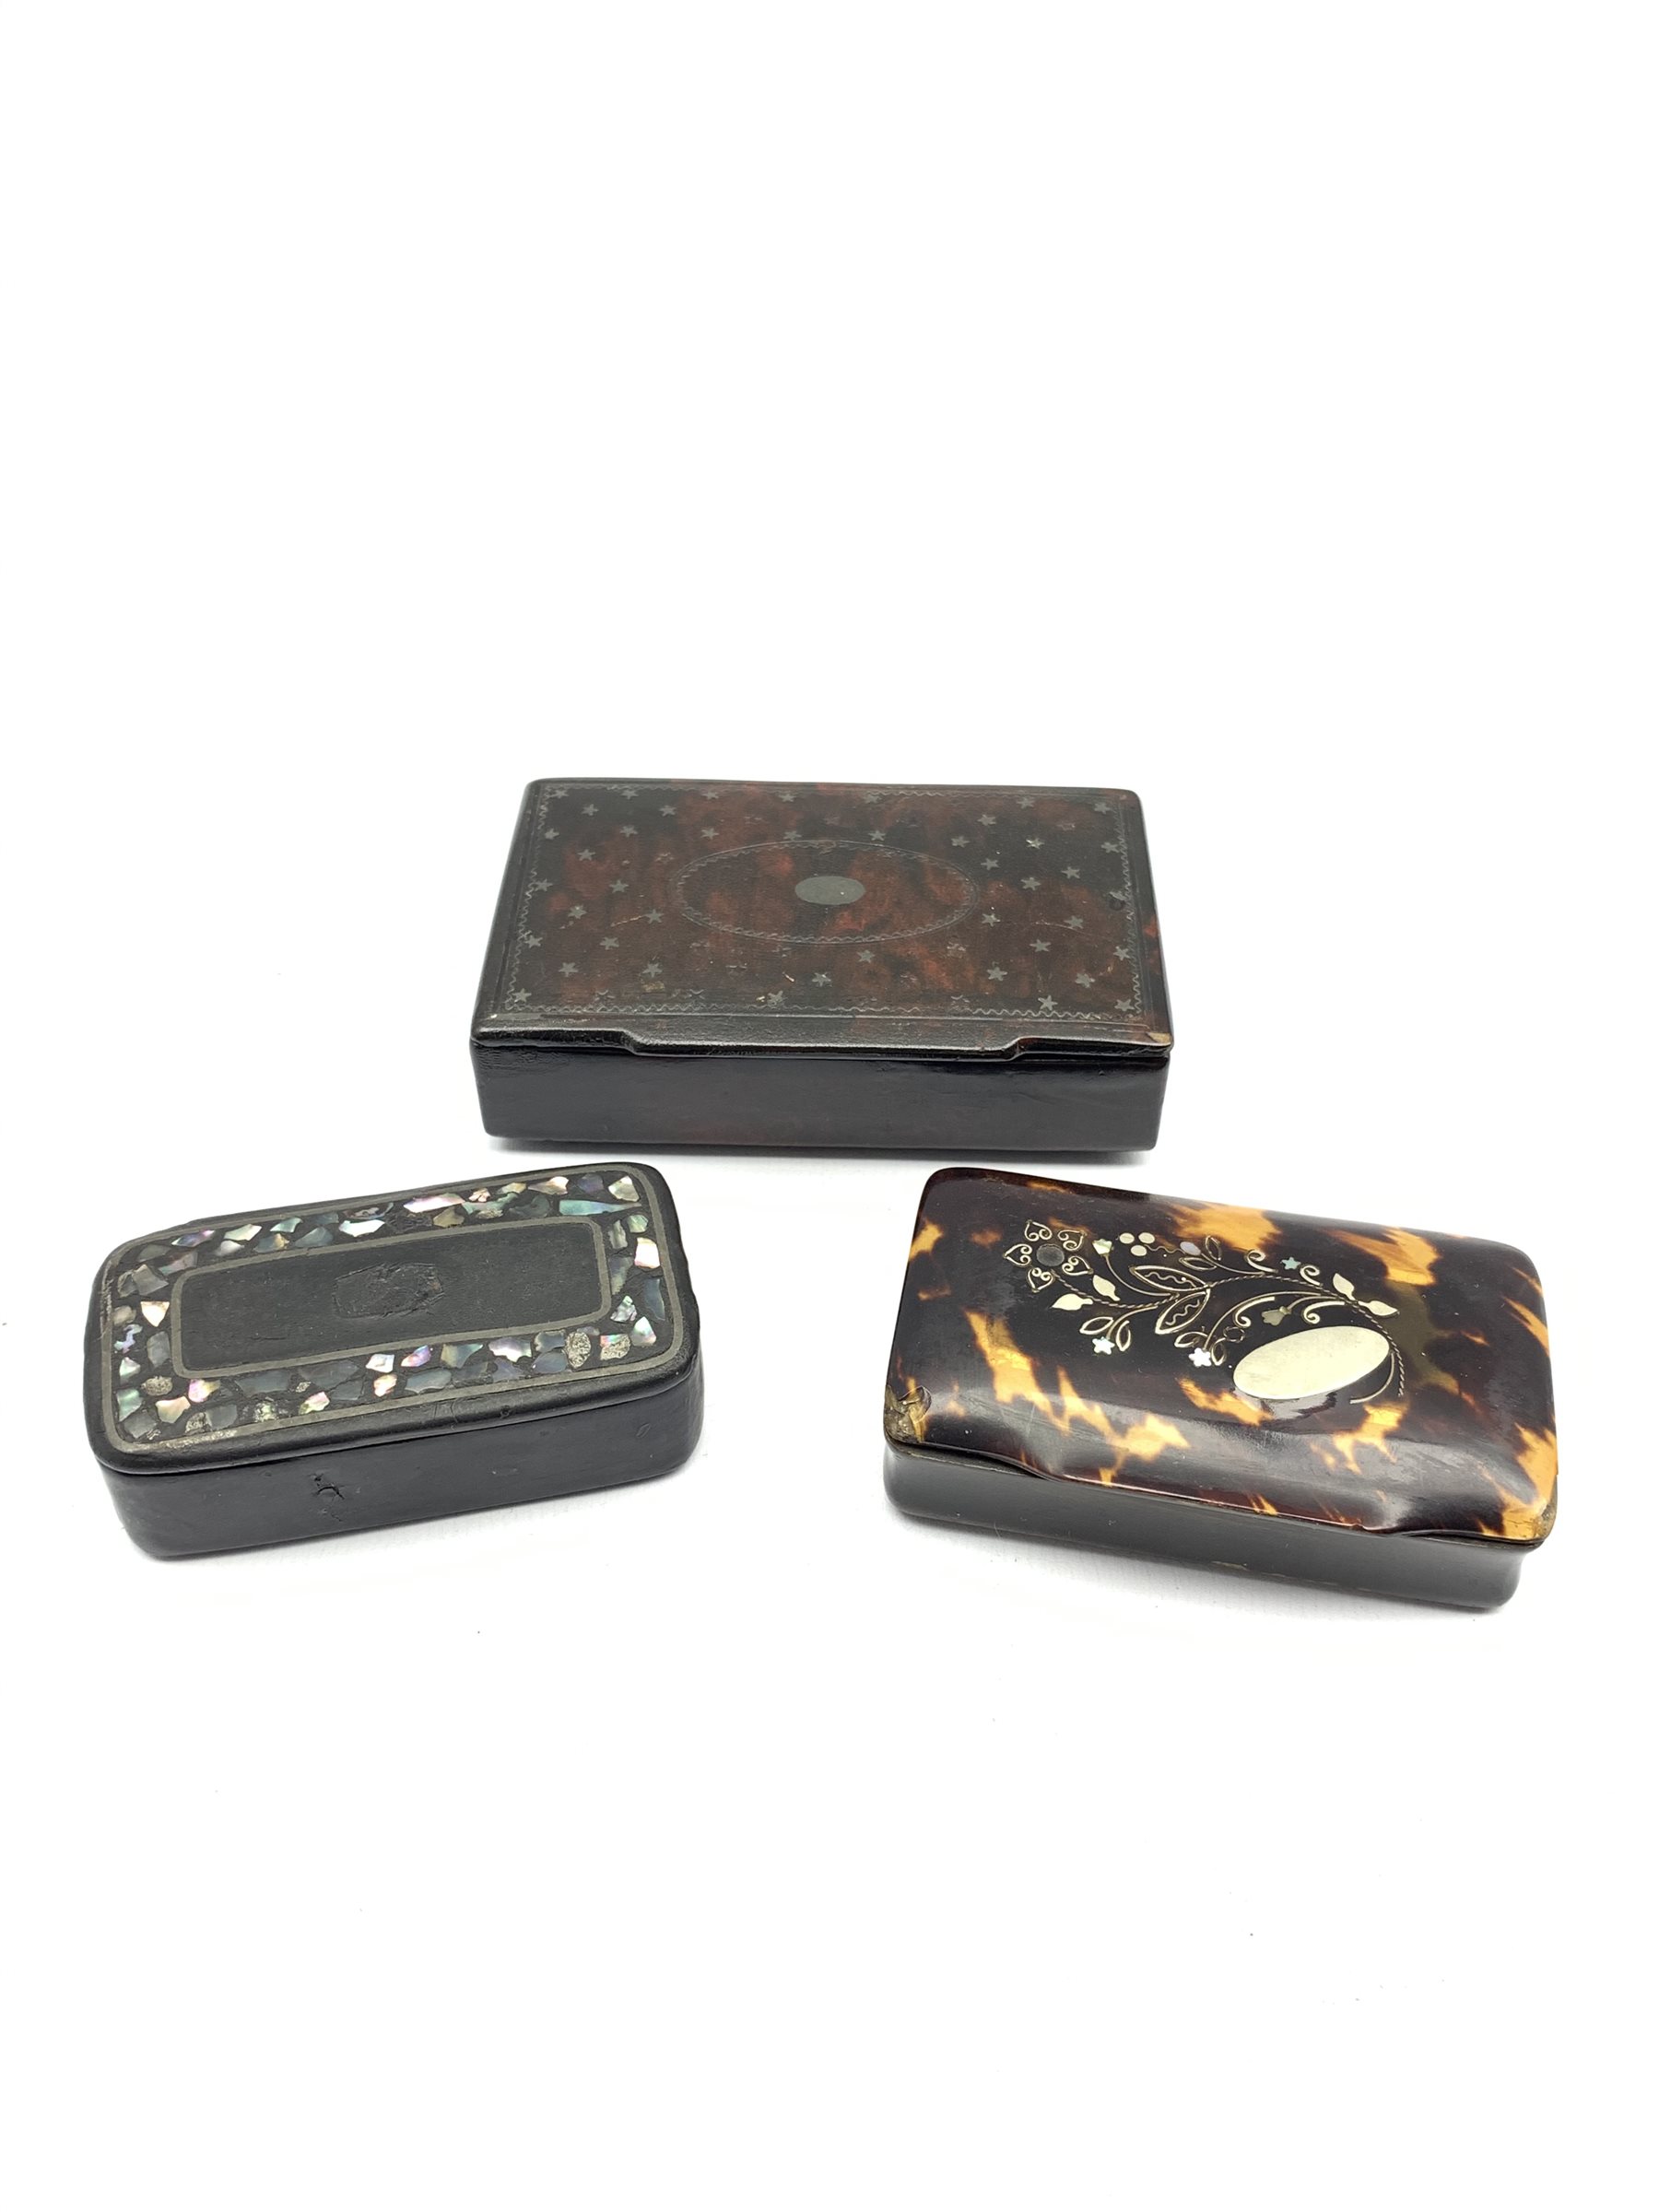 19th century rectangular papier-mache snuff box, the cover with pique work decoration, tortoiseshell - Image 2 of 2